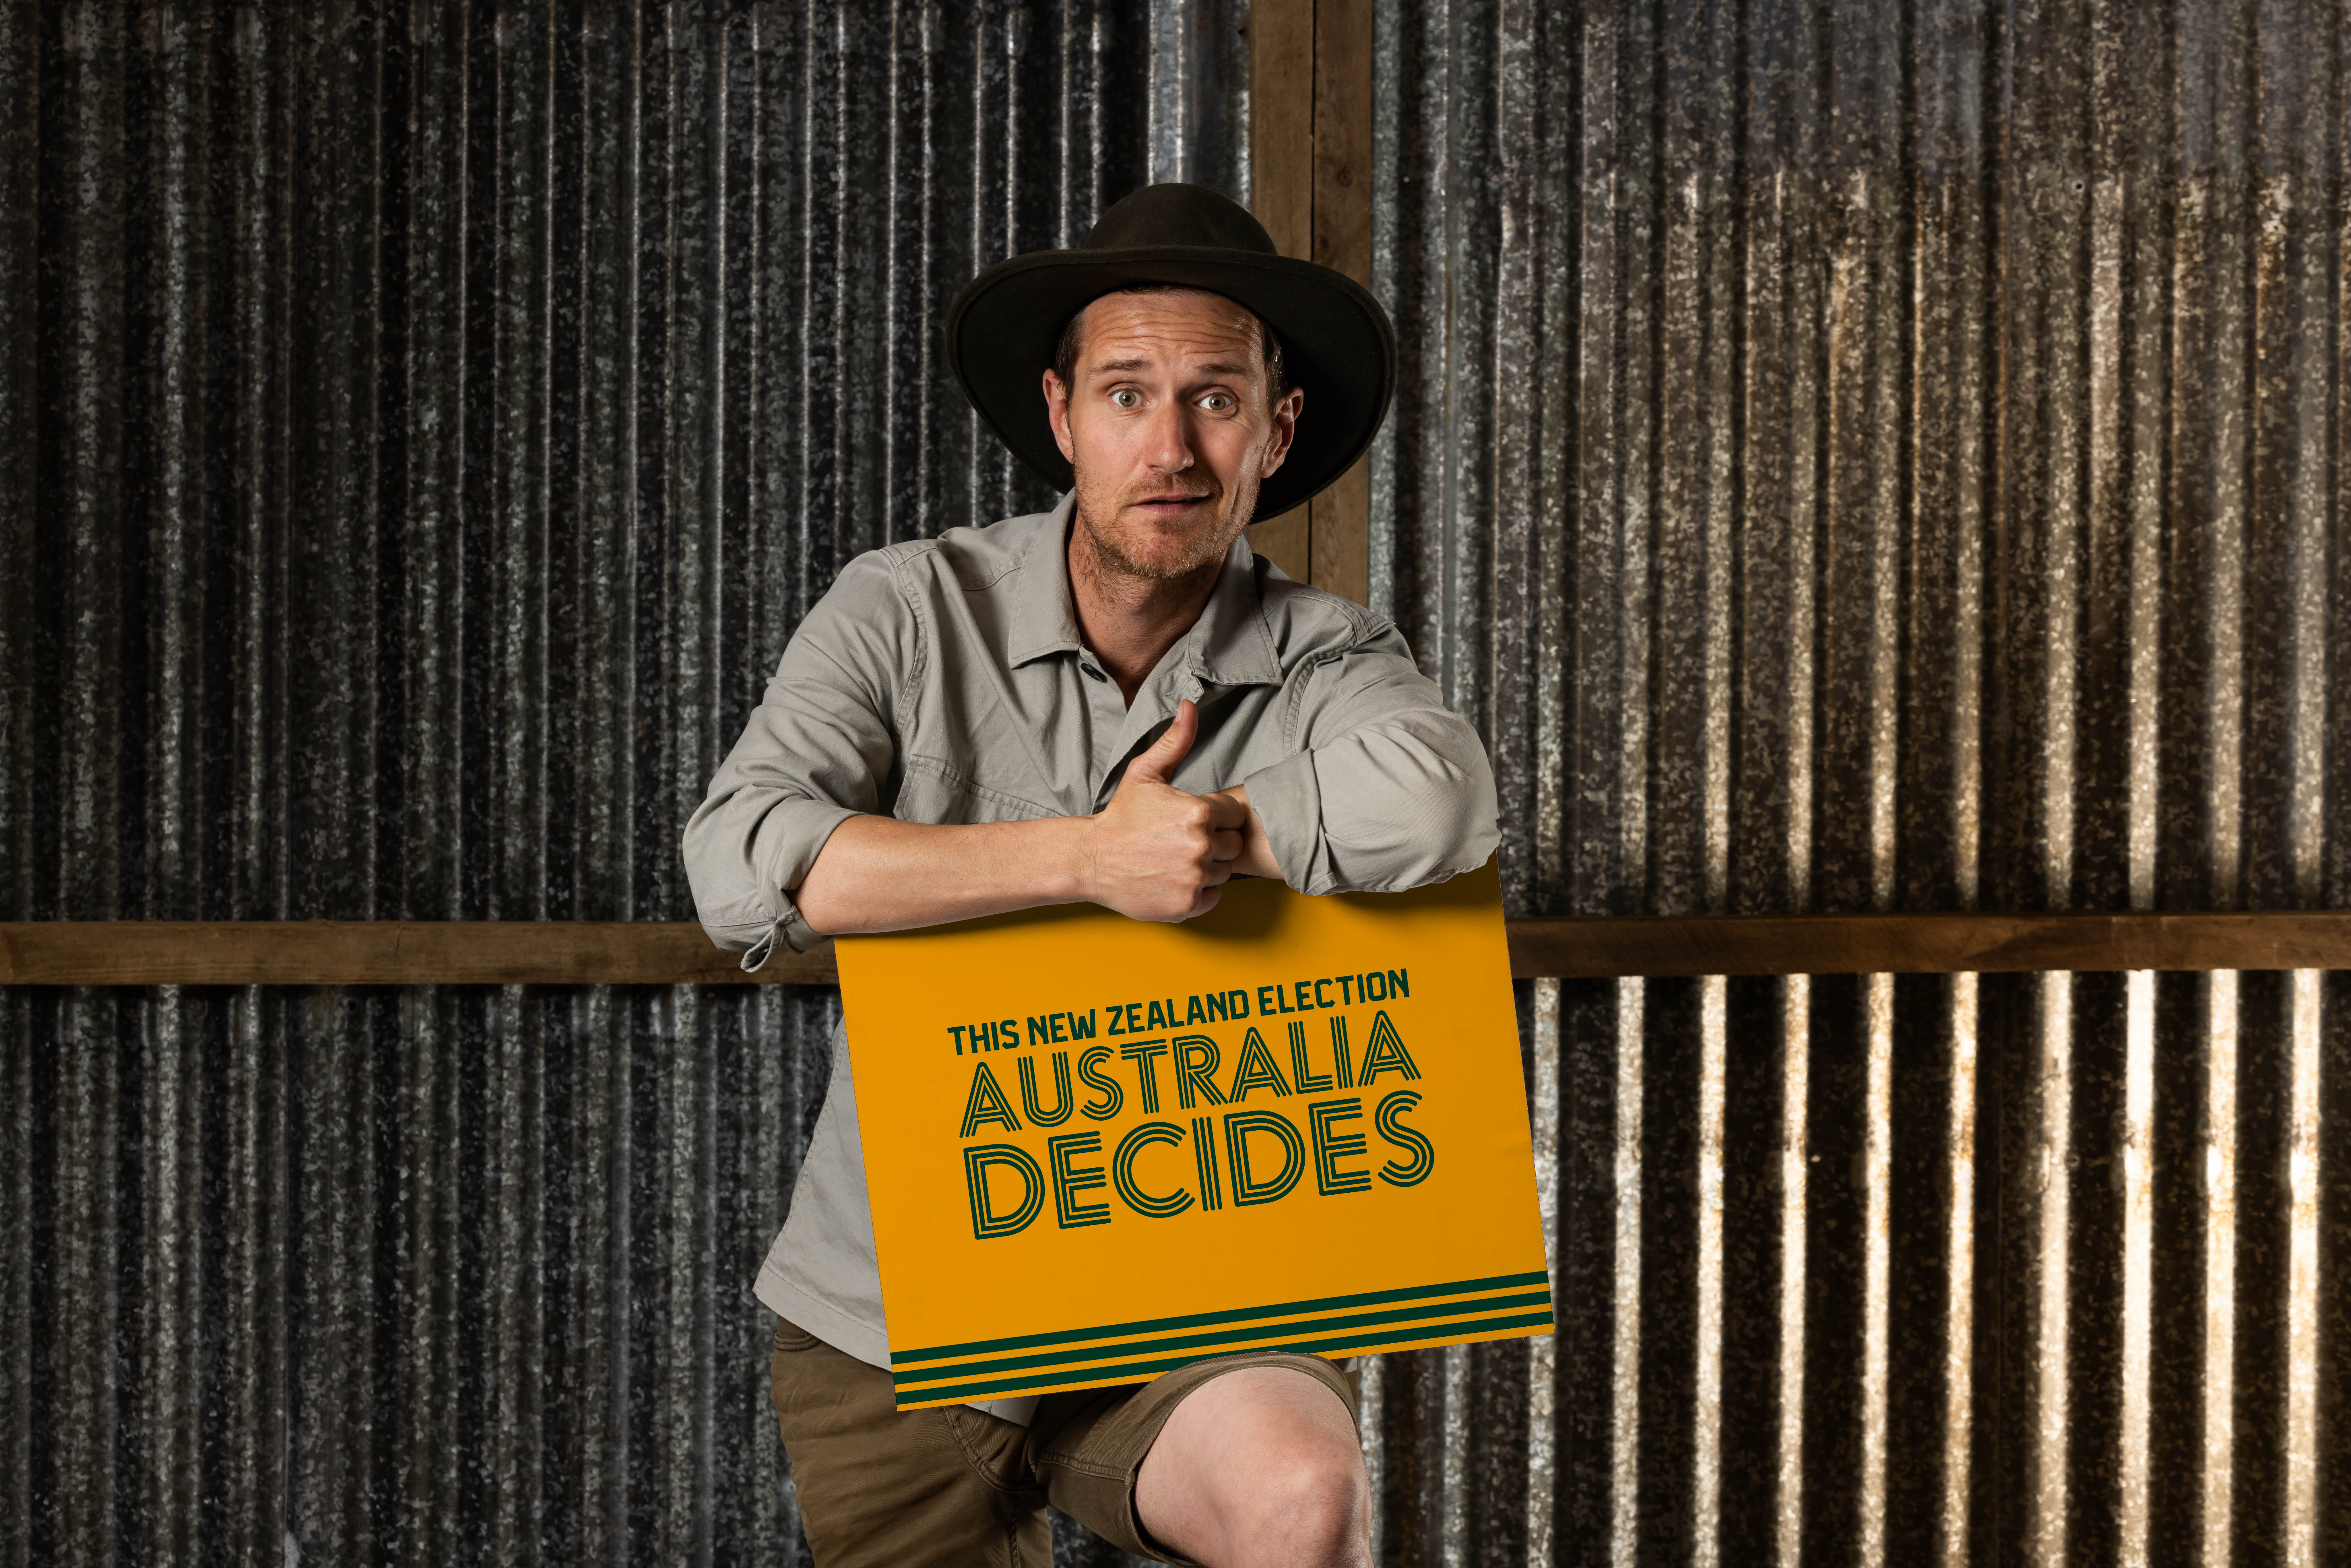 ‘This election we’re letting Australia decide’